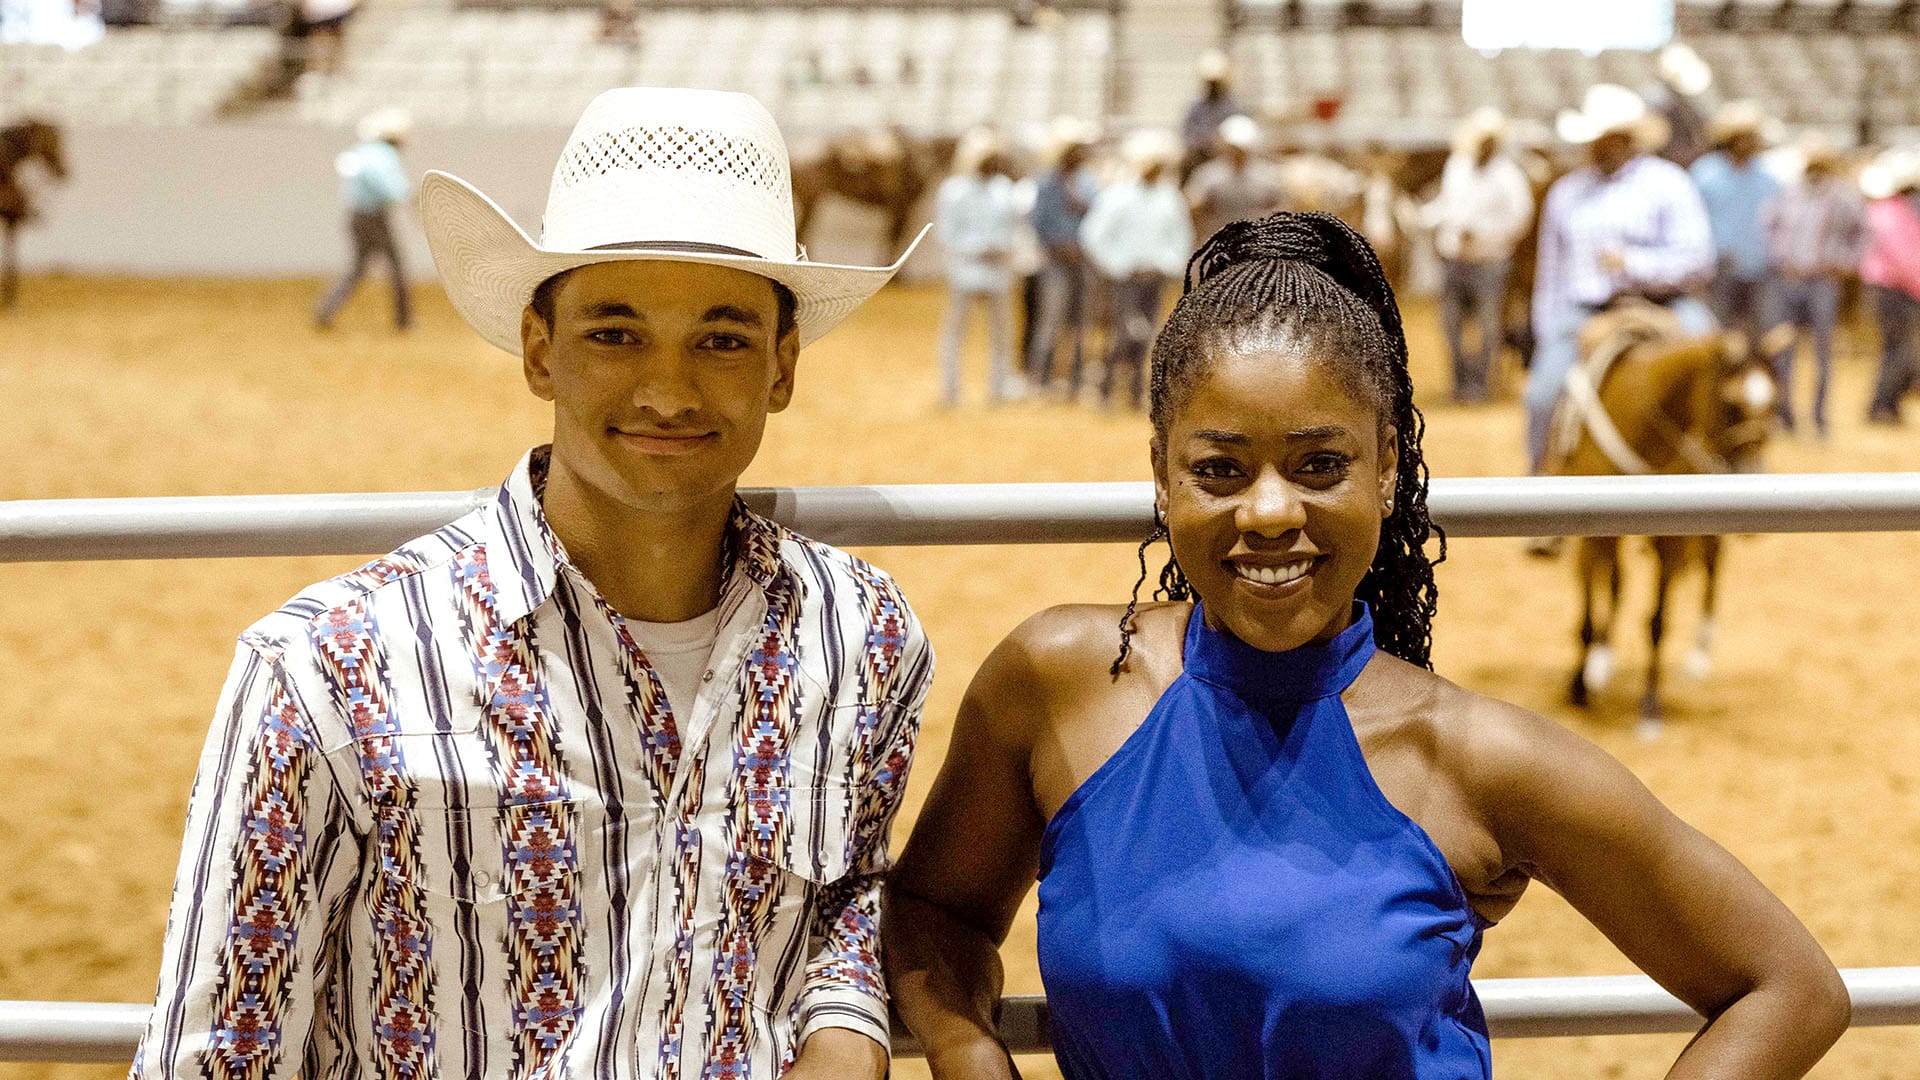 A woman and man pose in front of the rodeo arena